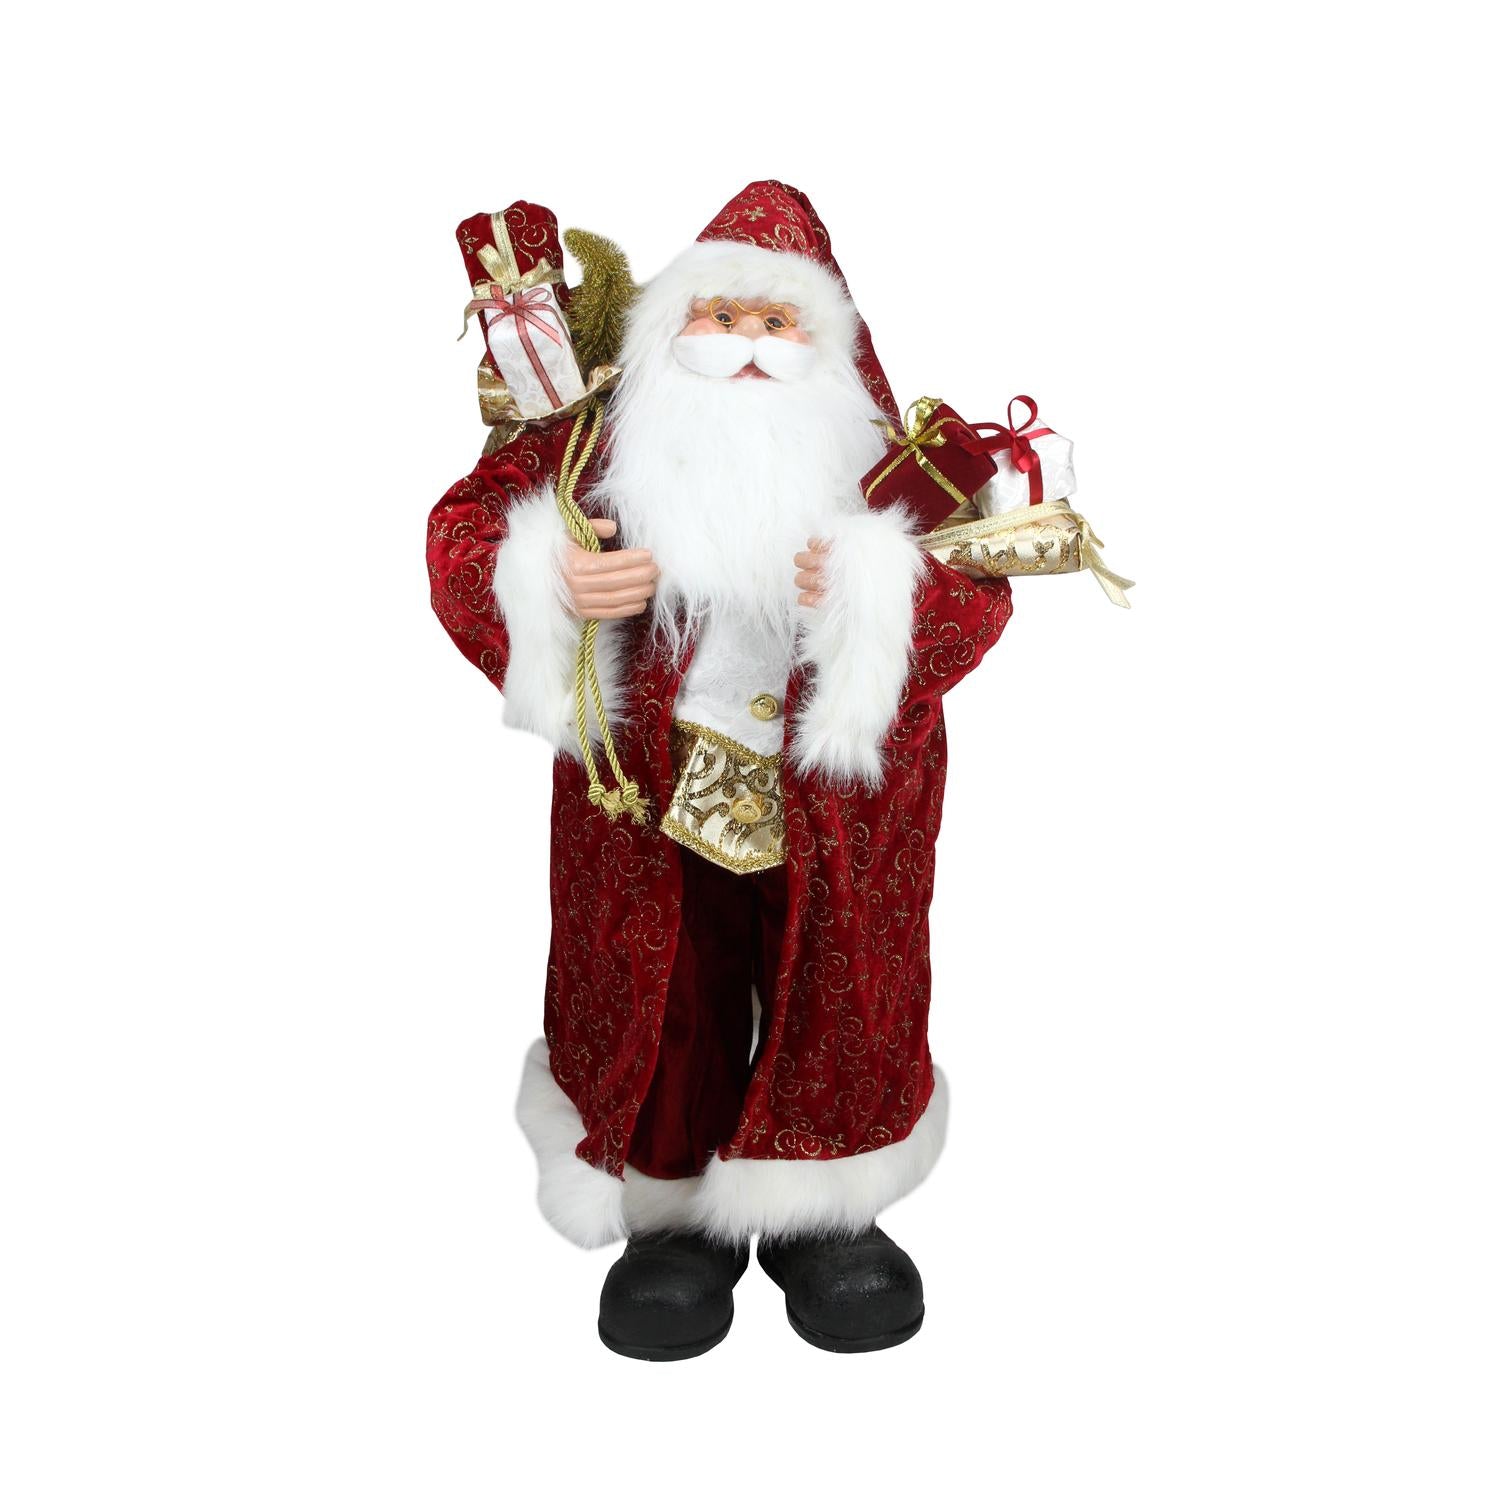 32" Standing Santa Claus in Long Red and Gold Robe with Gifts Christmas Figure